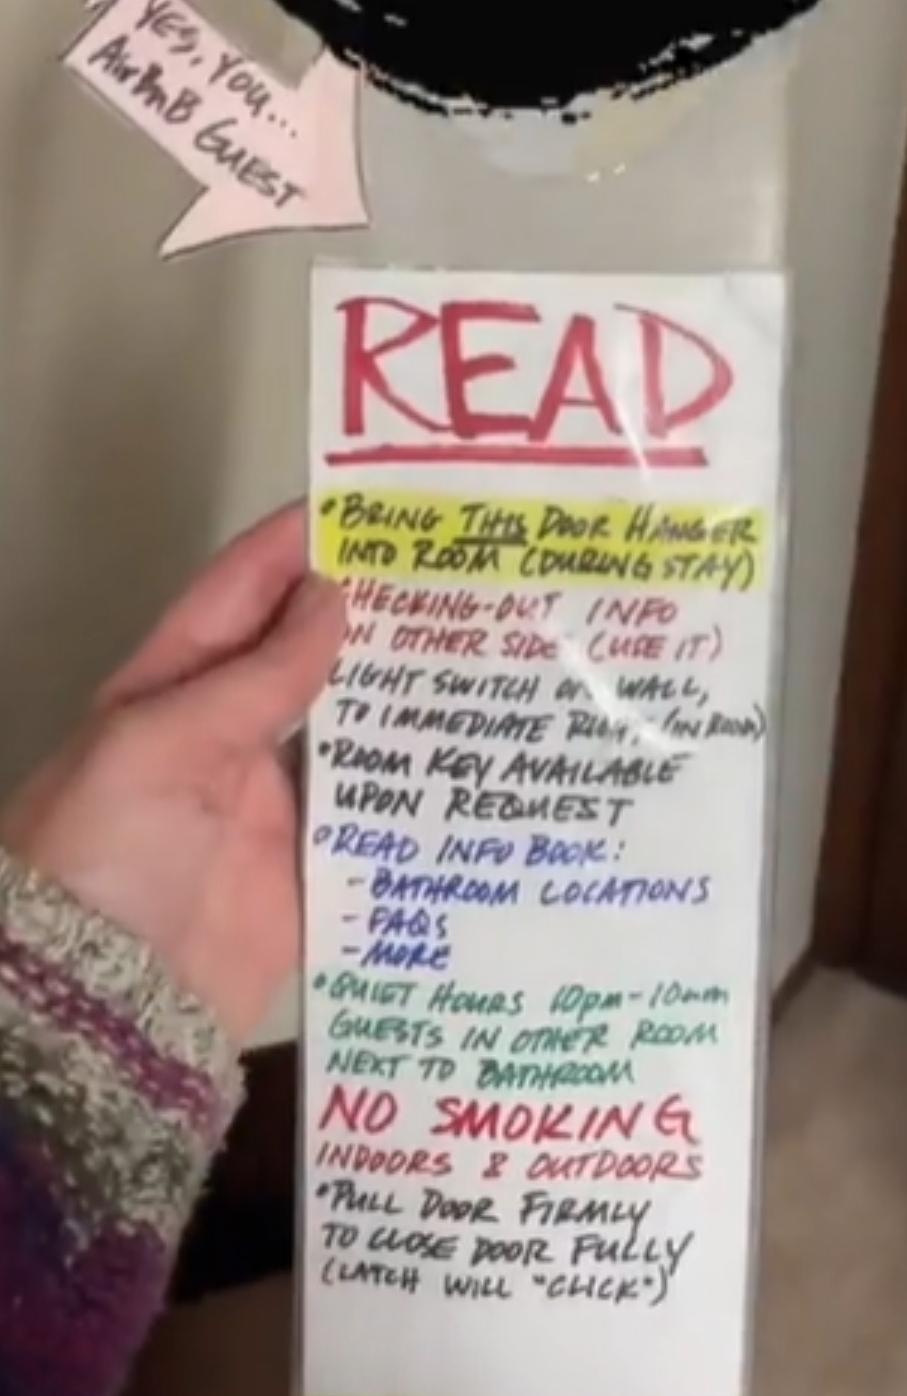 The woman shared the Airbnb rules. Picture: @Authentiffany_/TikTok